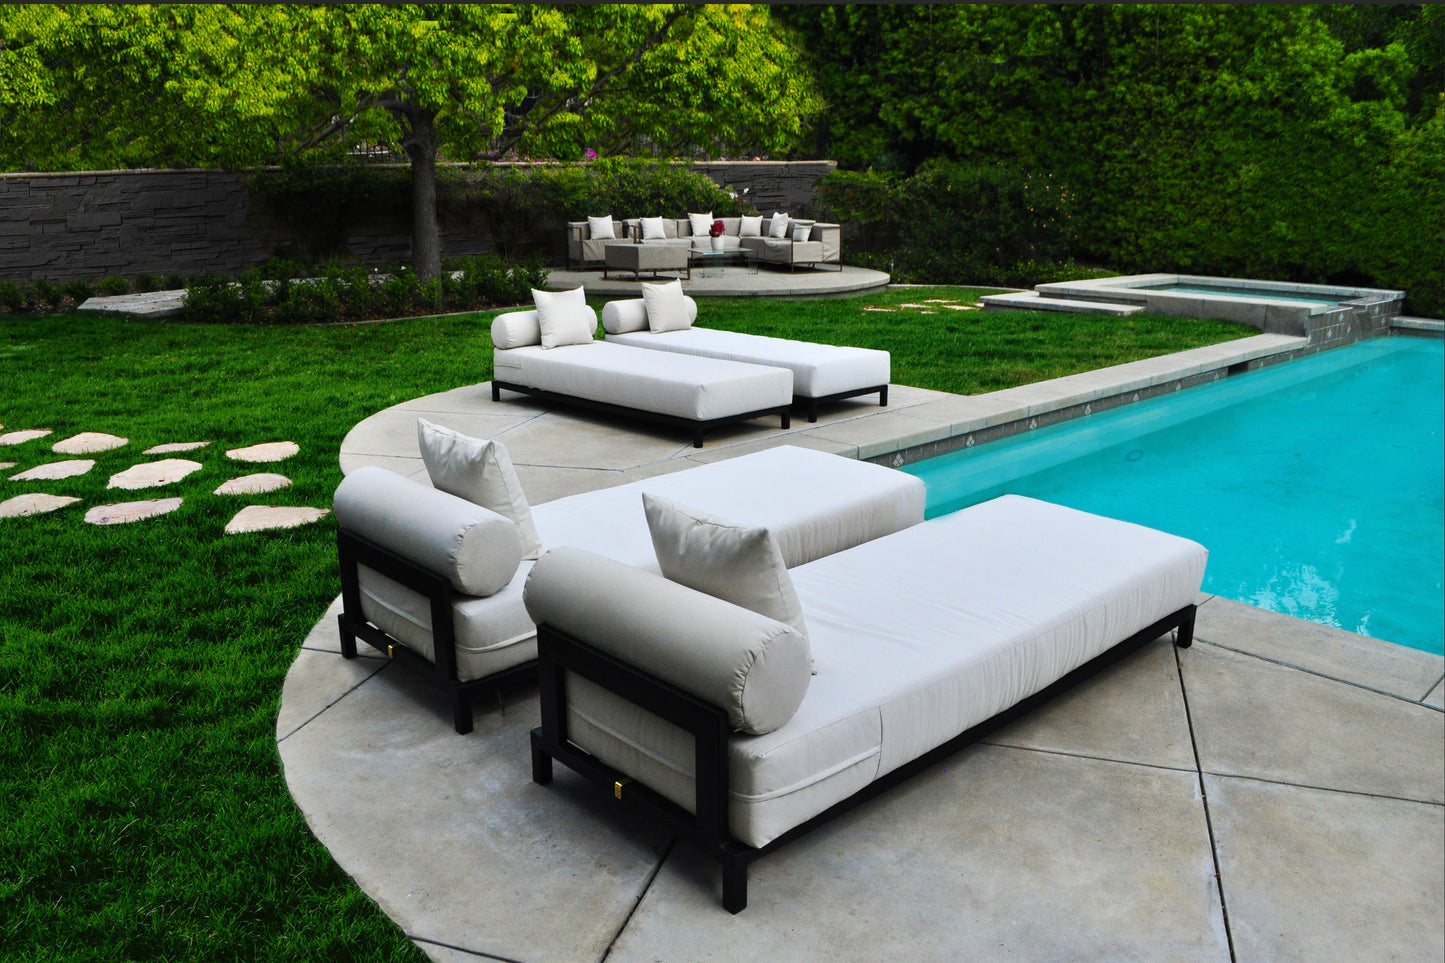 Volantes Outdoor White Chaise Loungers (Set of 2)